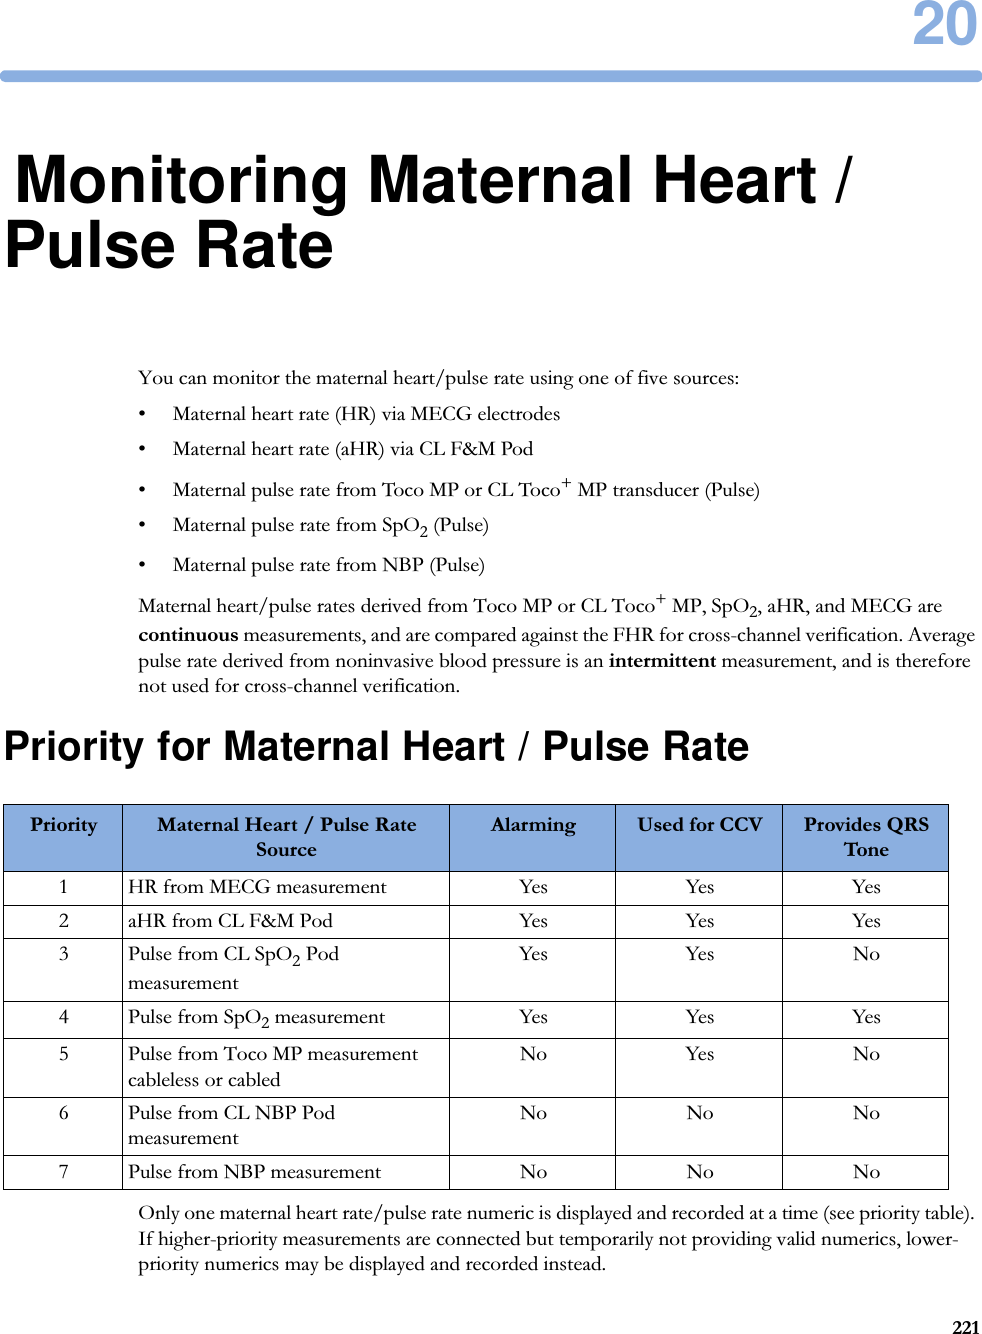 2022120Monitoring Maternal Heart / Pulse RateYou can monitor the maternal heart/pulse rate using one of five sources:• Maternal heart rate (HR) via MECG electrodes• Maternal heart rate (aHR) via CL F&amp;M Pod• Maternal pulse rate from Toco MP or CL Toco+ MP transducer (Pulse)• Maternal pulse rate from SpO2 (Pulse)• Maternal pulse rate from NBP (Pulse)Maternal heart/pulse rates derived from Toco MP or CL Toco+ MP, SpO2, aHR, and MECG are continuous measurements, and are compared against the FHR for cross-channel verification. Average pulse rate derived from noninvasive blood pressure is an intermittent measurement, and is therefore not used for cross-channel verification.Priority for Maternal Heart / Pulse RateOnly one maternal heart rate/pulse rate numeric is displayed and recorded at a time (see priority table). If higher-priority measurements are connected but temporarily not providing valid numerics, lower-priority numerics may be displayed and recorded instead.Priority Maternal Heart / Pulse Rate SourceAlarming Used for CCV Provides QRS Tone1 HR from MECG measurement Yes Yes Yes2 aHR from CL F&amp;M Pod Yes Yes Yes3 Pulse from CL SpO2 Pod measurementYes Yes No4 Pulse from SpO2 measurement Yes Yes Yes5 Pulse from Toco MP measurement cableless or cabled No Yes No6 Pulse from CL NBP Pod measurementNo No No7 Pulse from NBP measurement No No No